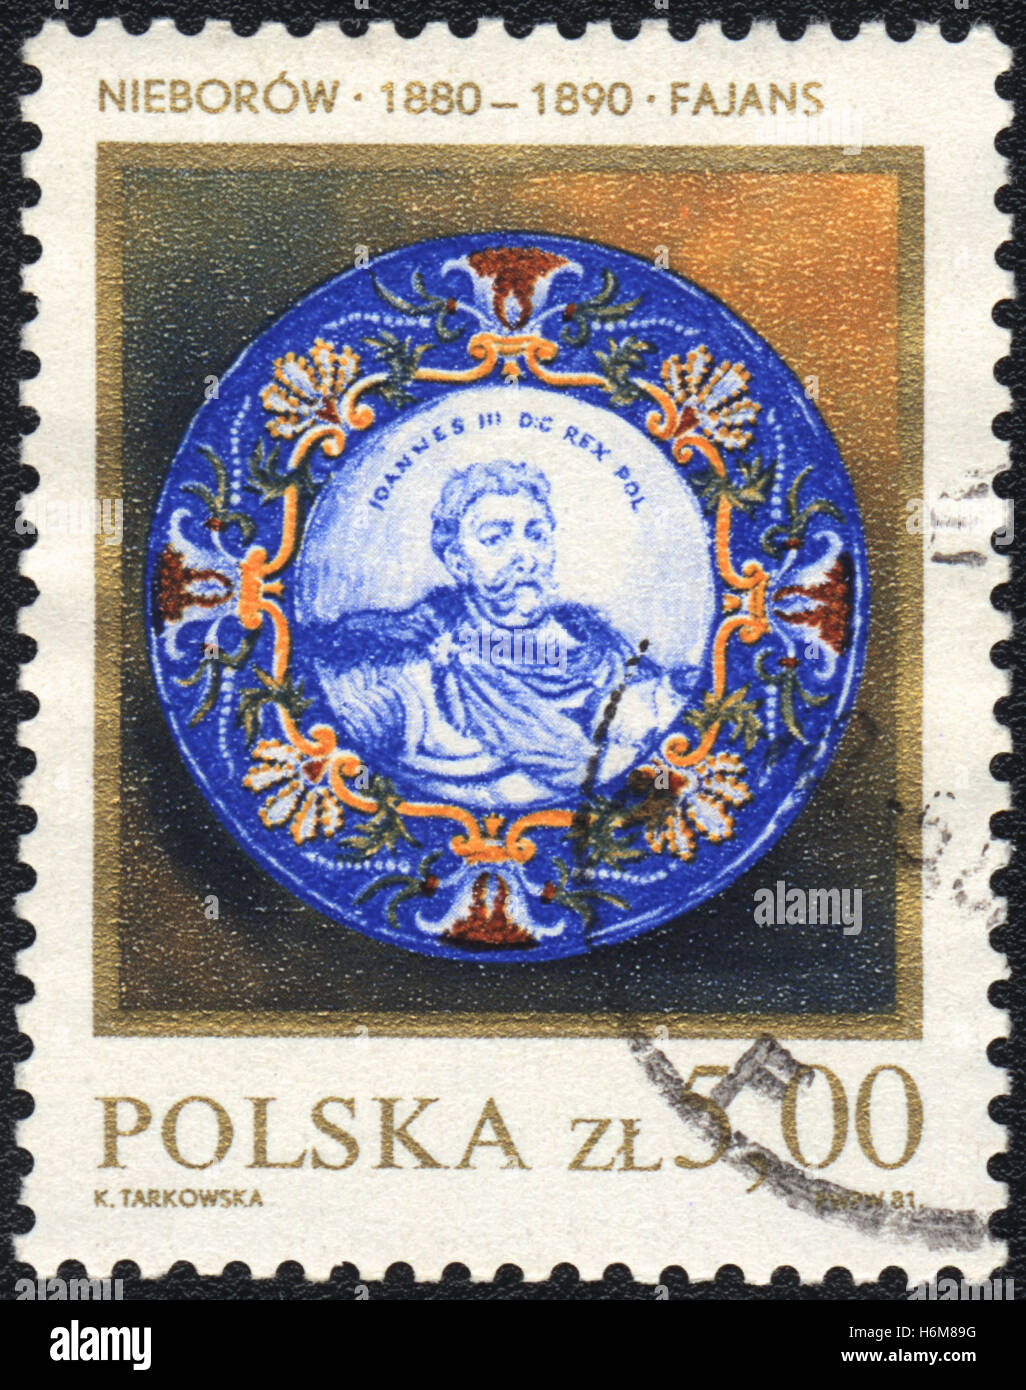 A postage stamp printed in Poland, shows Faience plate with portrait of King Jan III Sobieski,1880, (Neborow) , 1981 Stock Photo